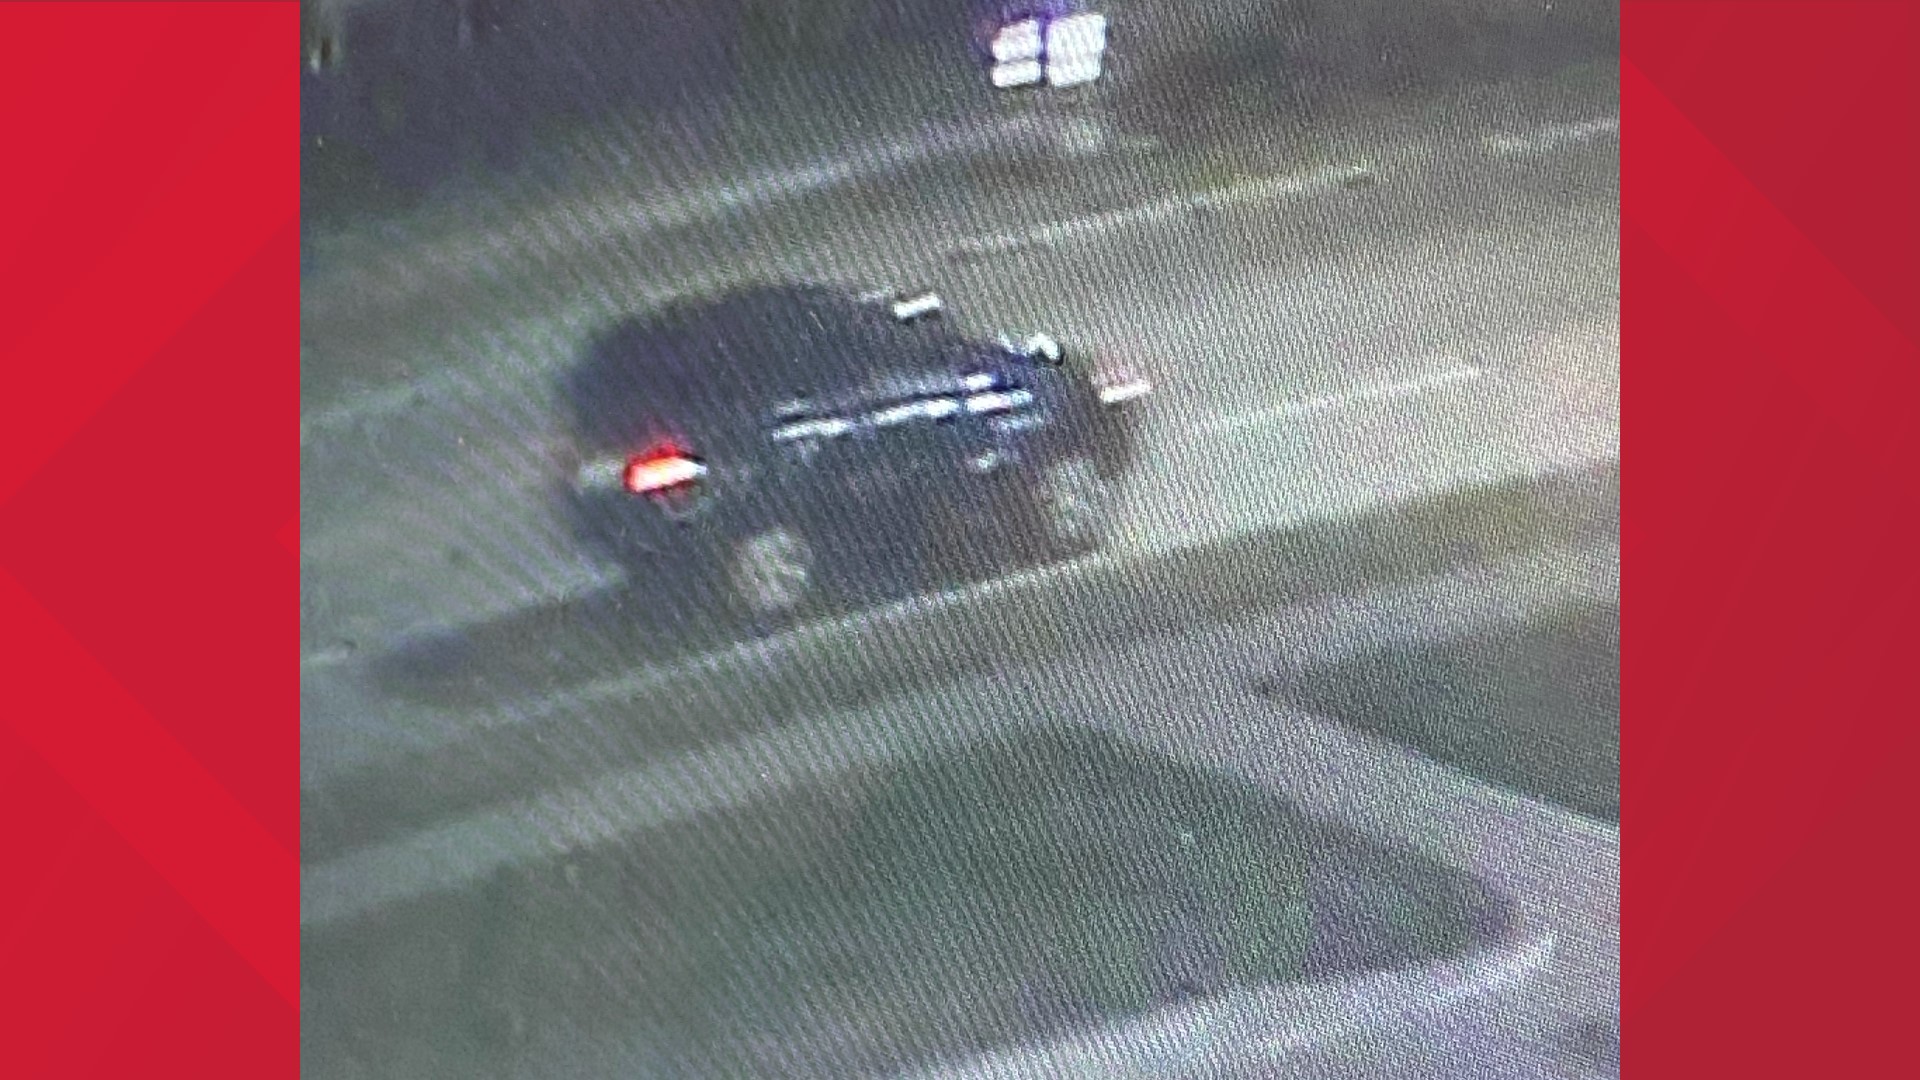 A dark-colored SUV believed to be involved was last seen driving northbound on SE 14th St., according to DMPD.